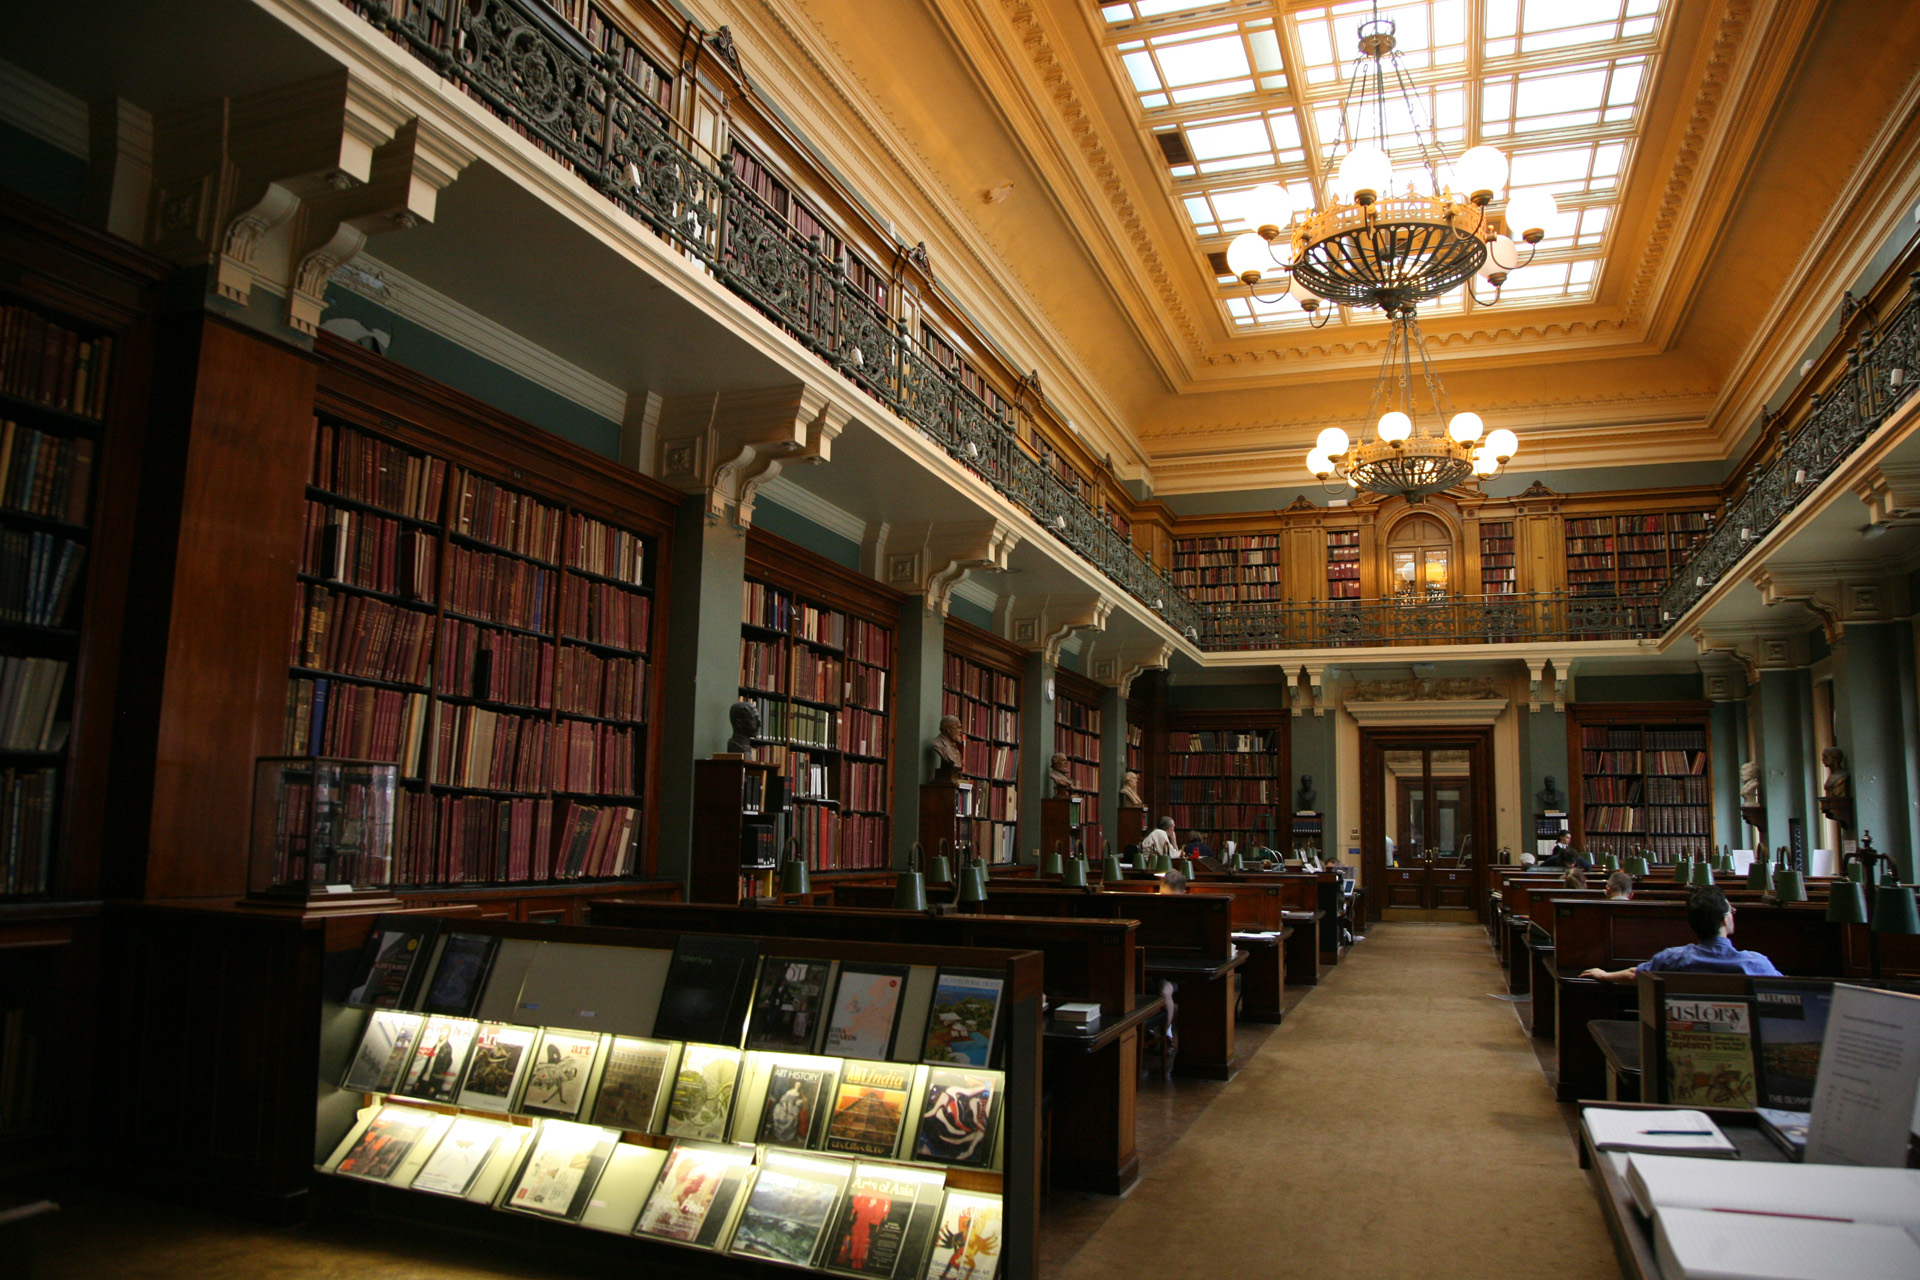 The National Art Library at the V&A